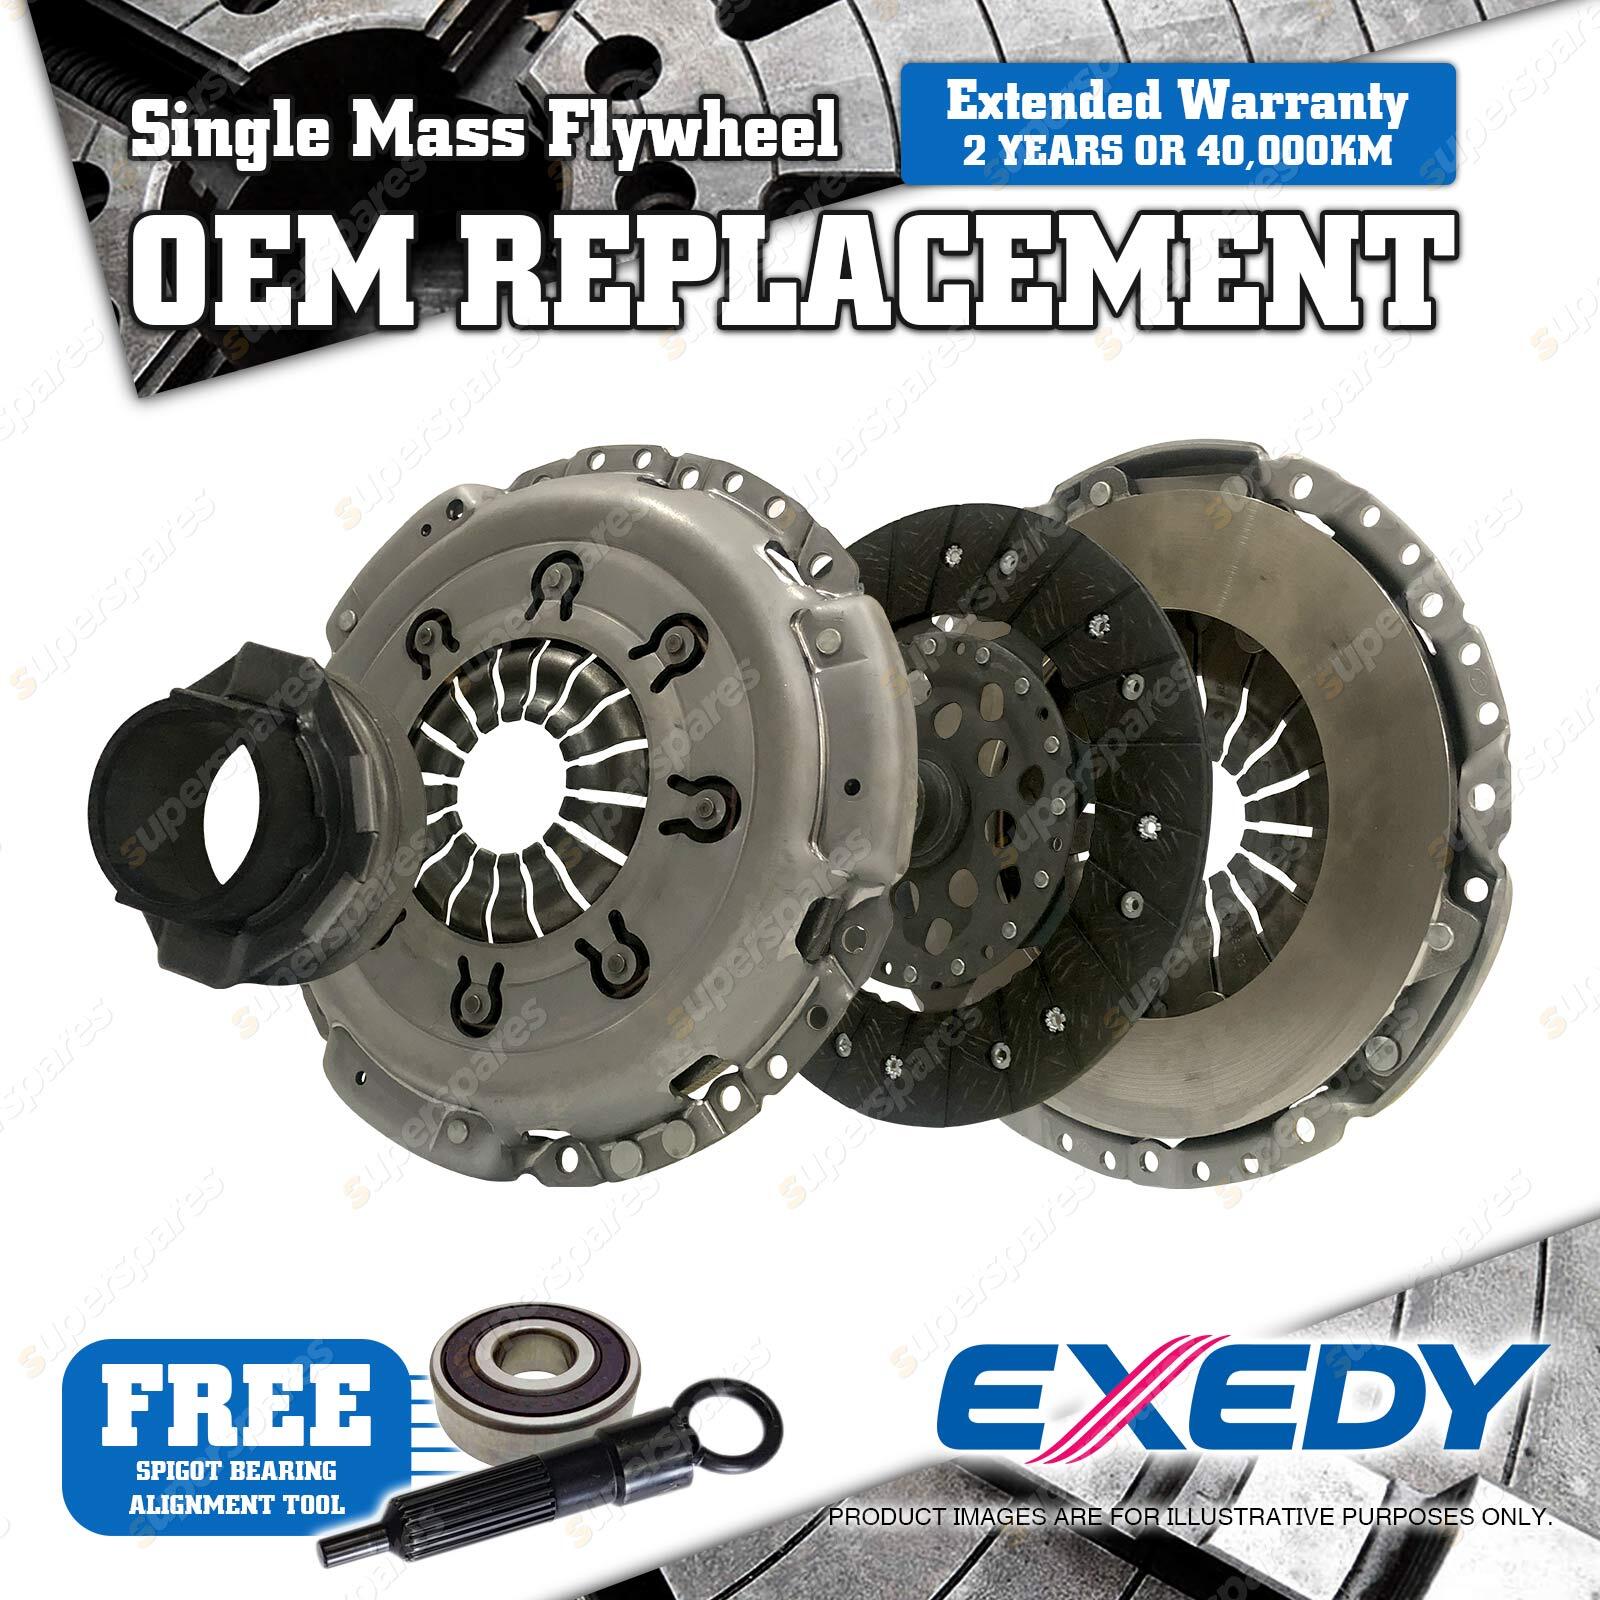 Details about   EXEDY Clutch Alignment Tools & Kits For TOYOTA HILUX LN111R 3L 4 Cyl Diesel Inj 